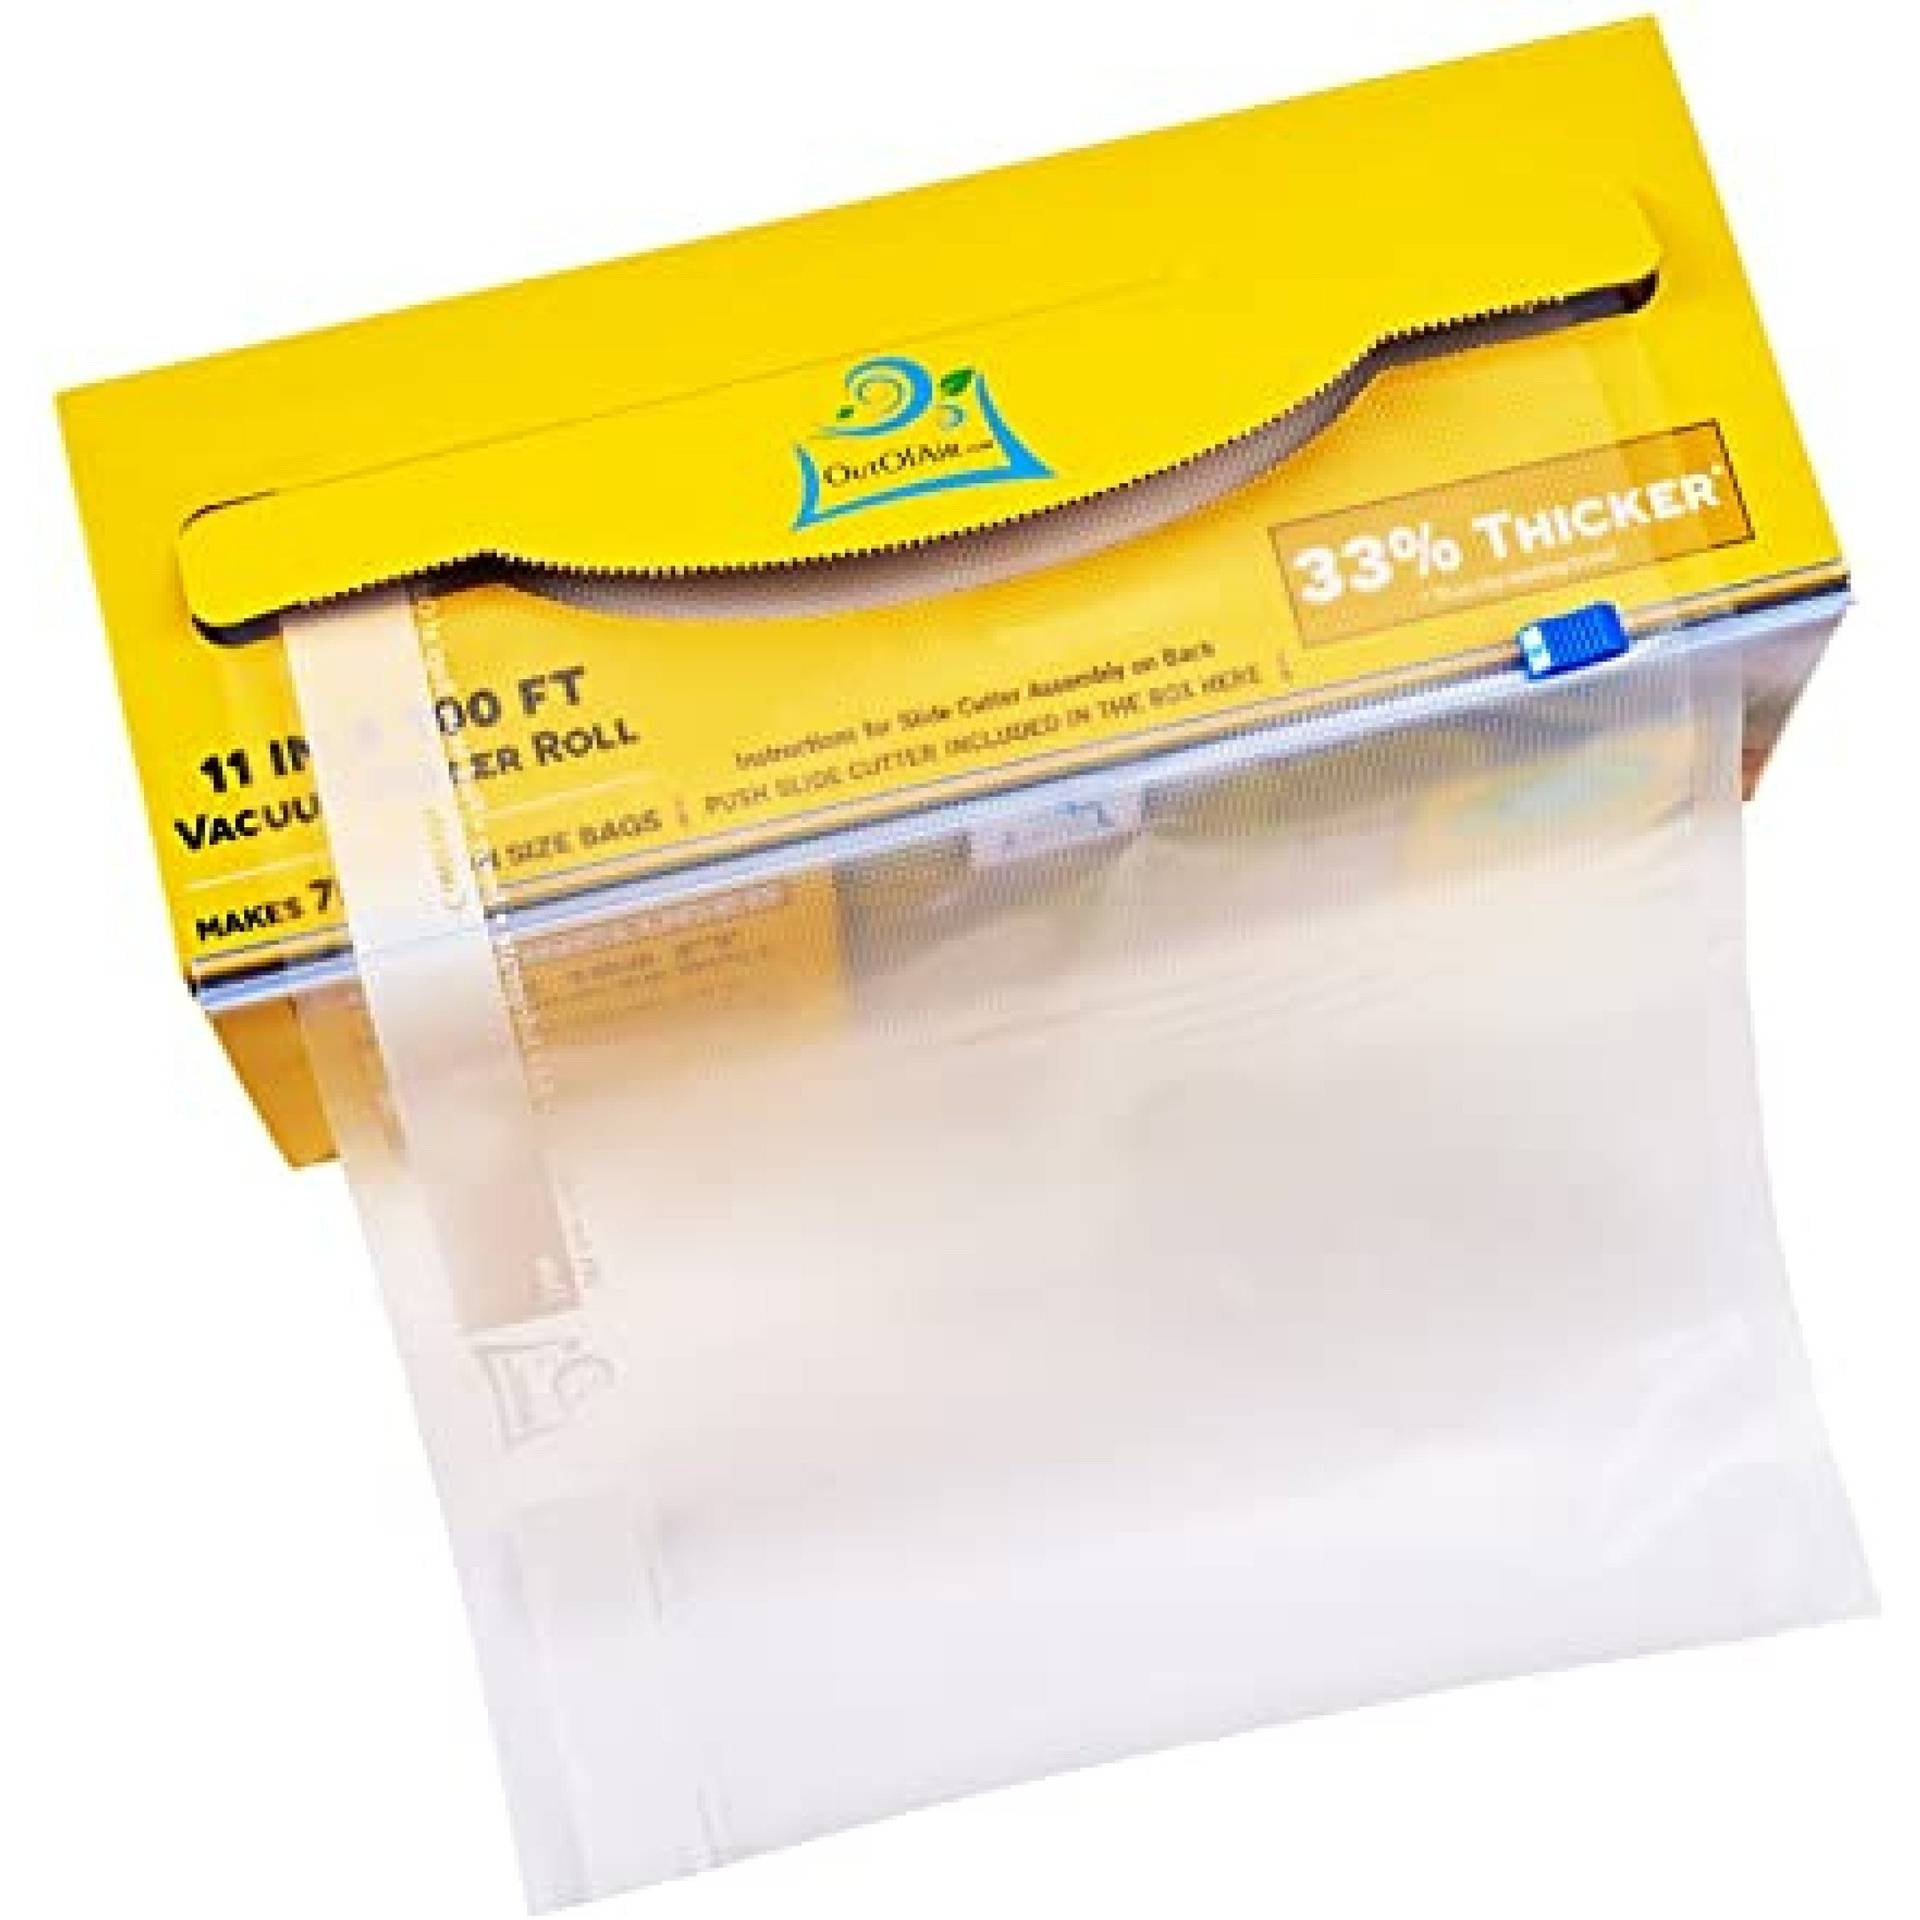 OutOfAir 8x100 vacuum sealer bag rolls with writable white label